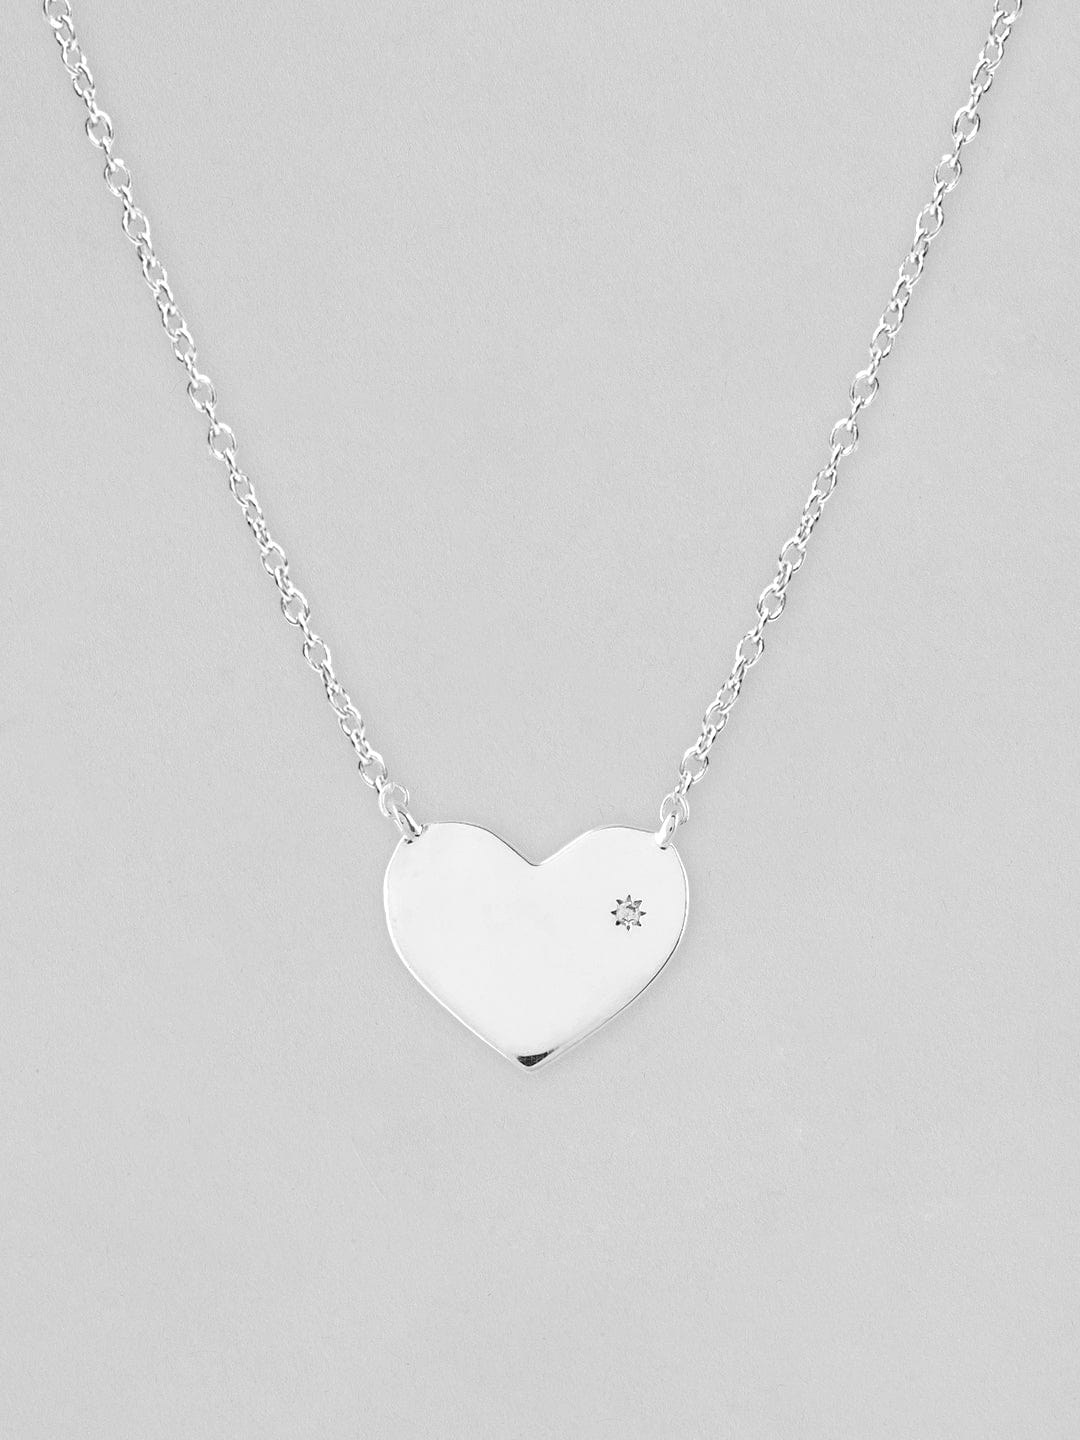 Rubans 925 Silver The Silvery Heart Pendant Necklace. Chain & Necklaces